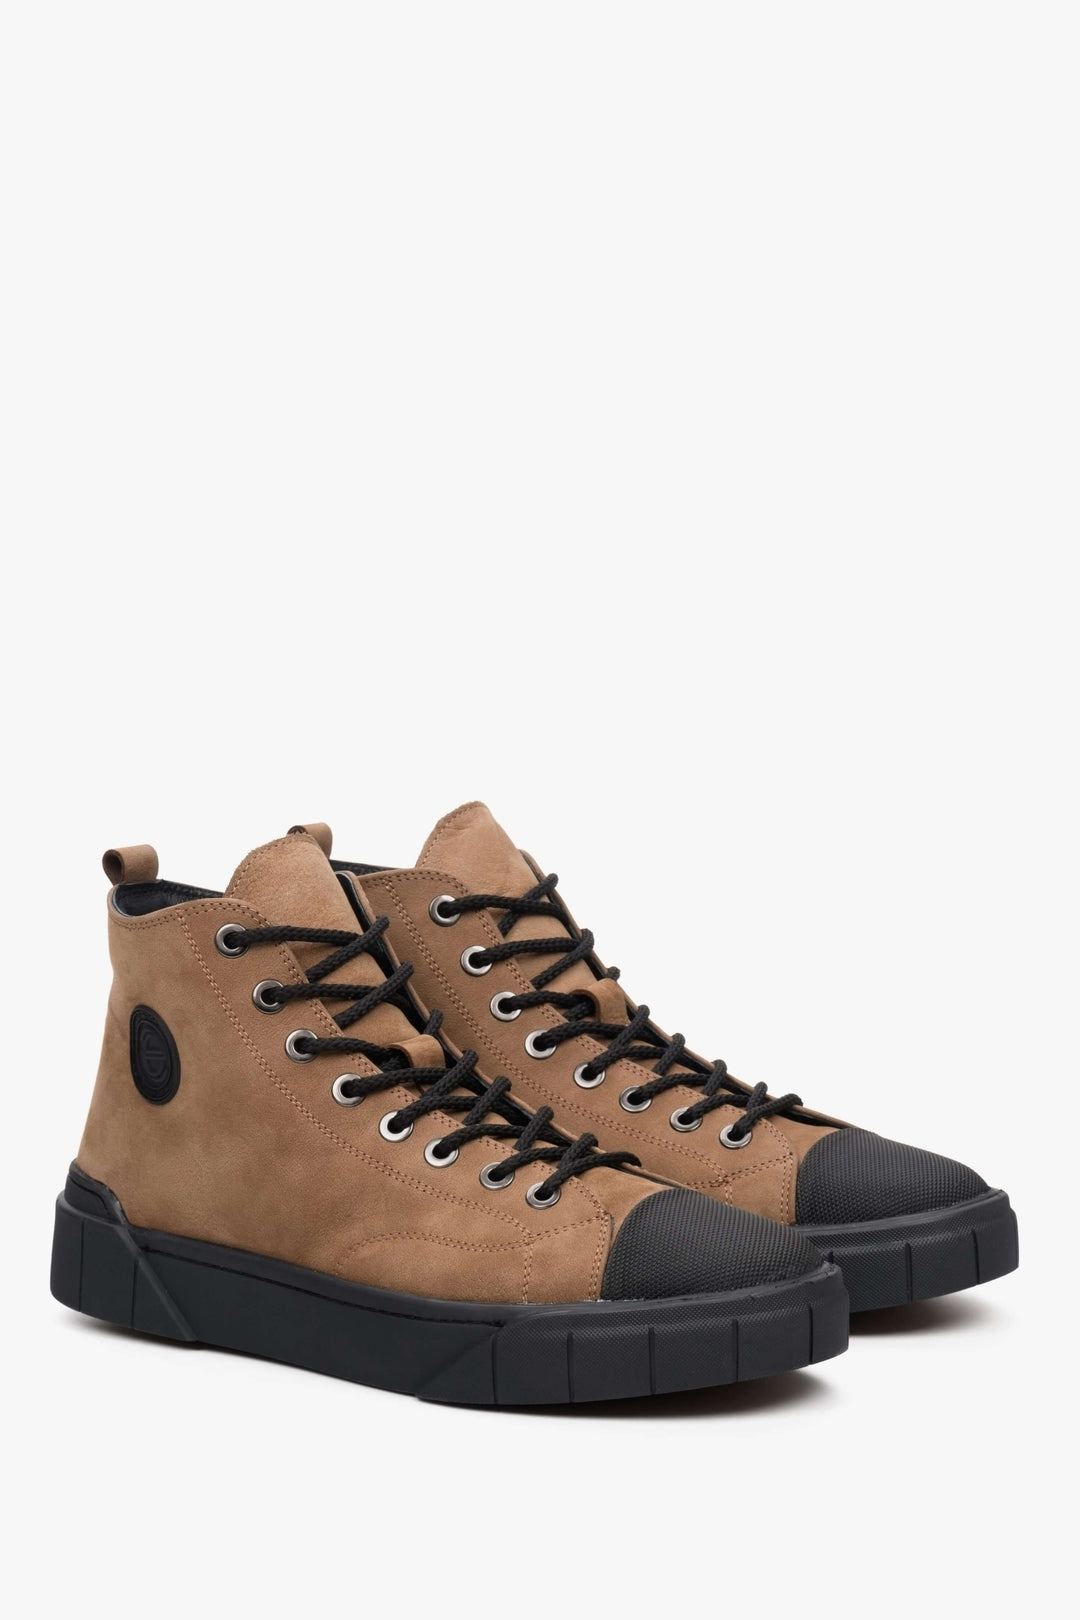 High-top brown men's lace-up sneakers by Estro - presentation of a shoe toe and sideline.